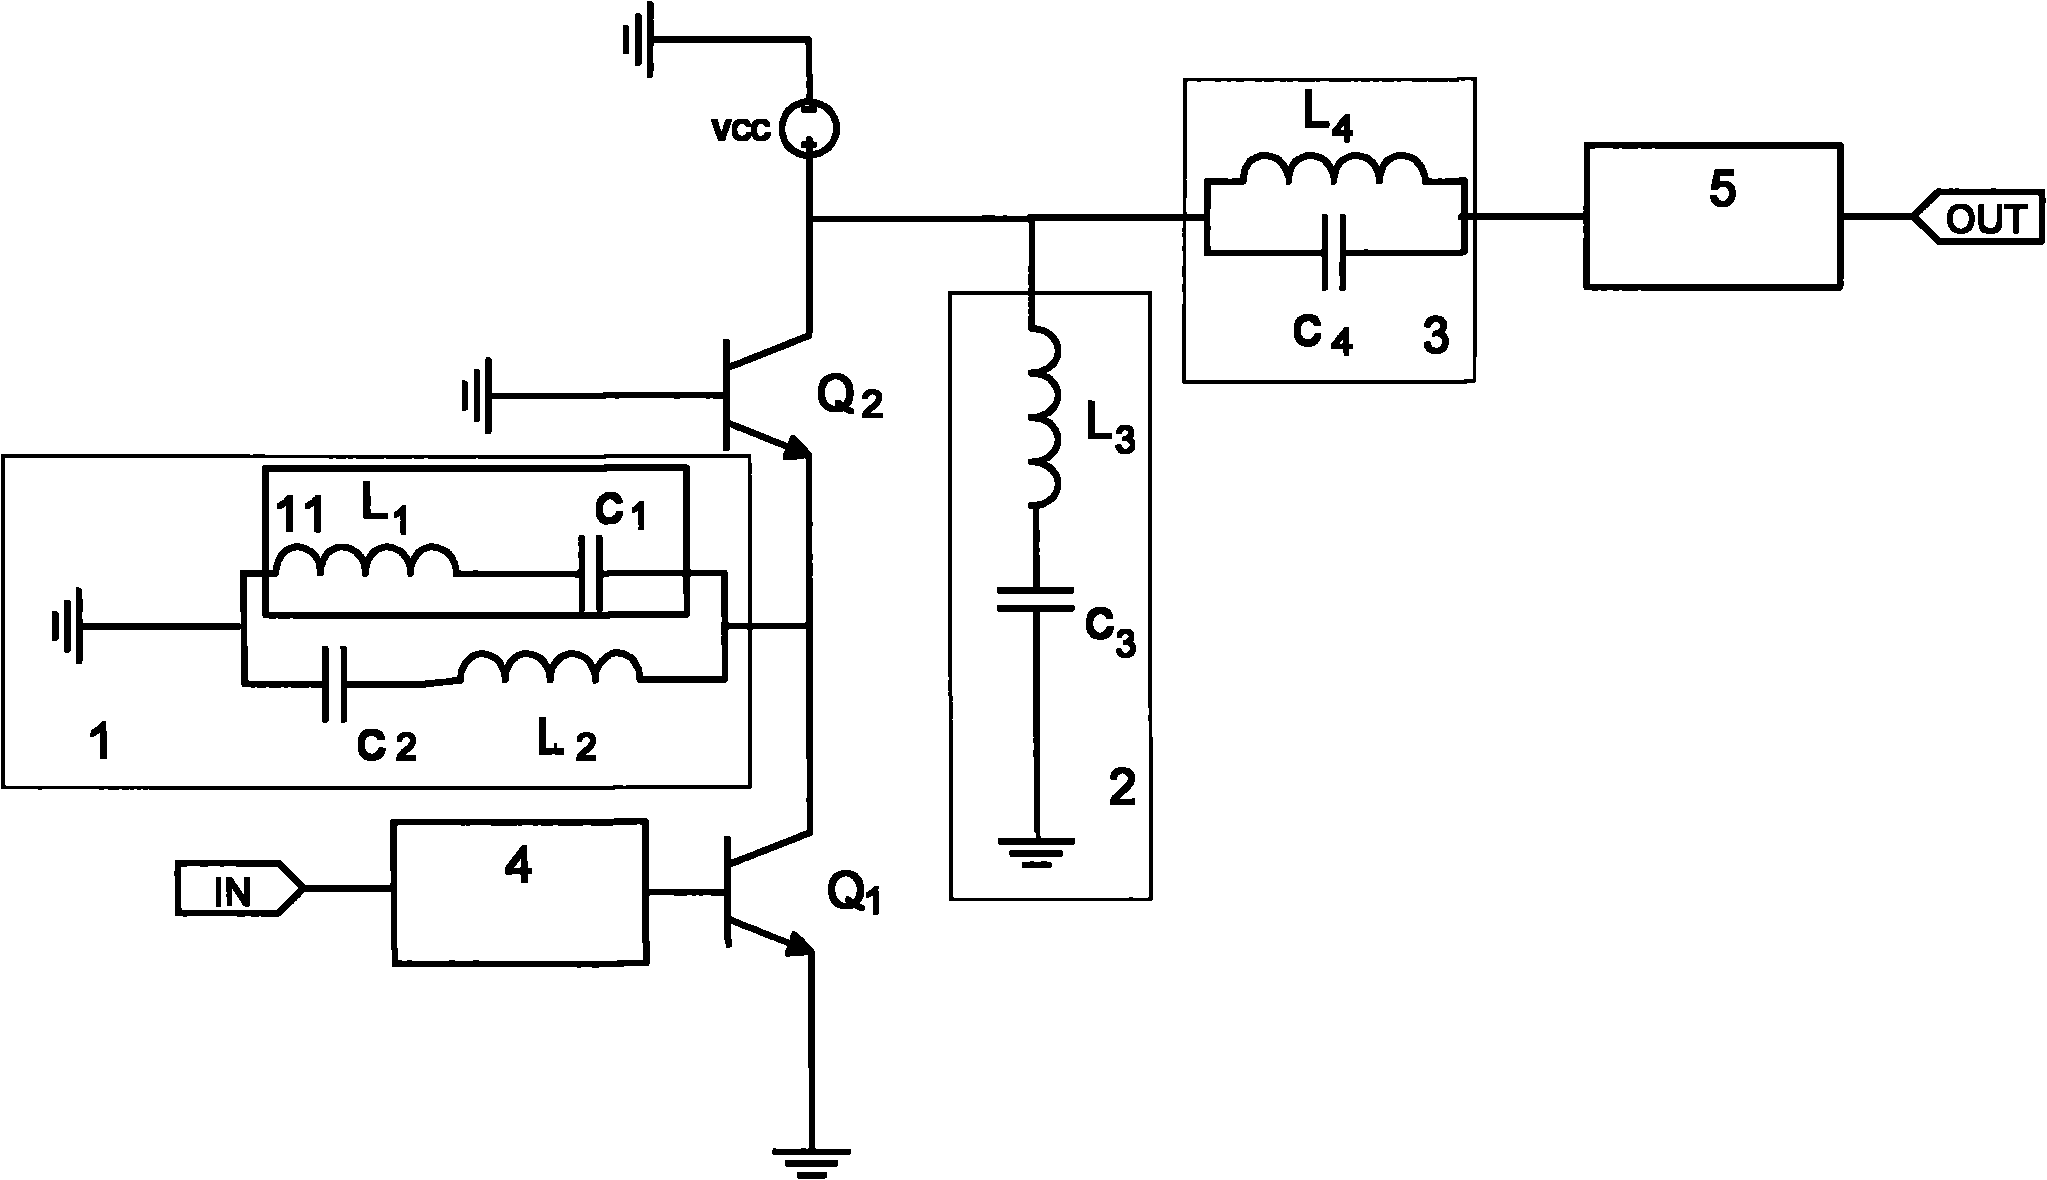 Circuit for improving linearity and power added efficiency of power amplifier